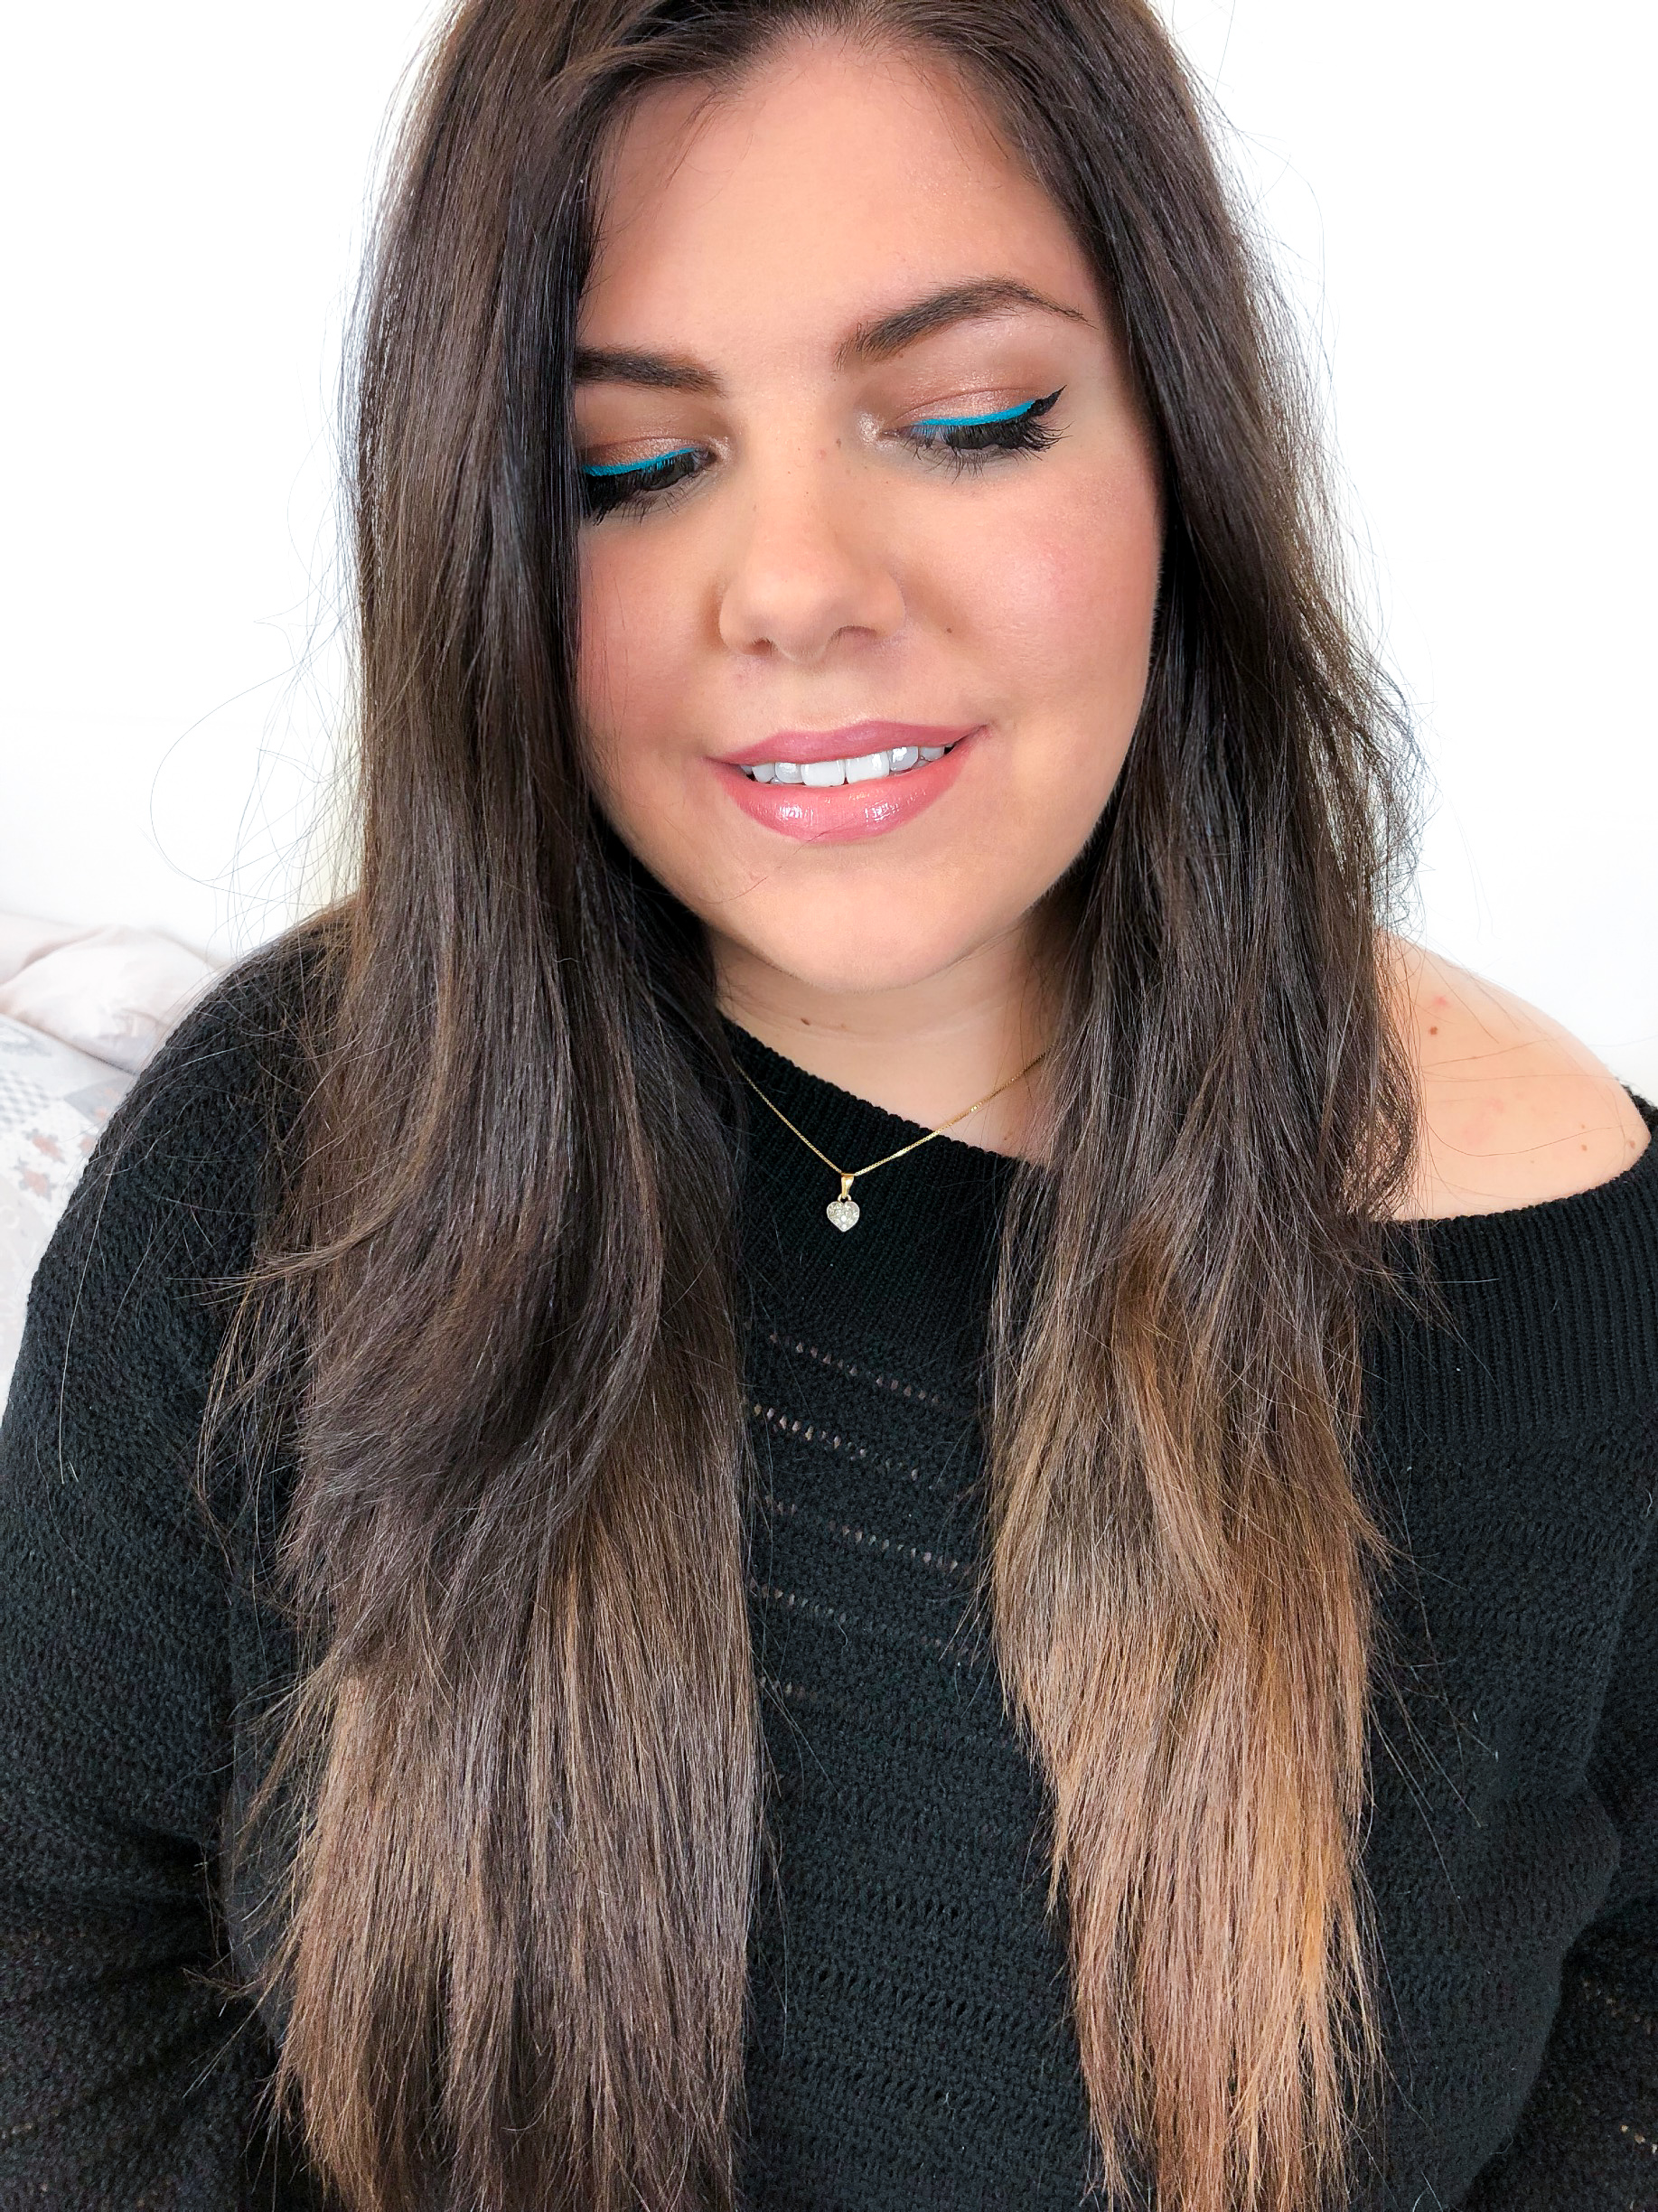 Double Eyeliner Makeup, how to wear colours with green eyes